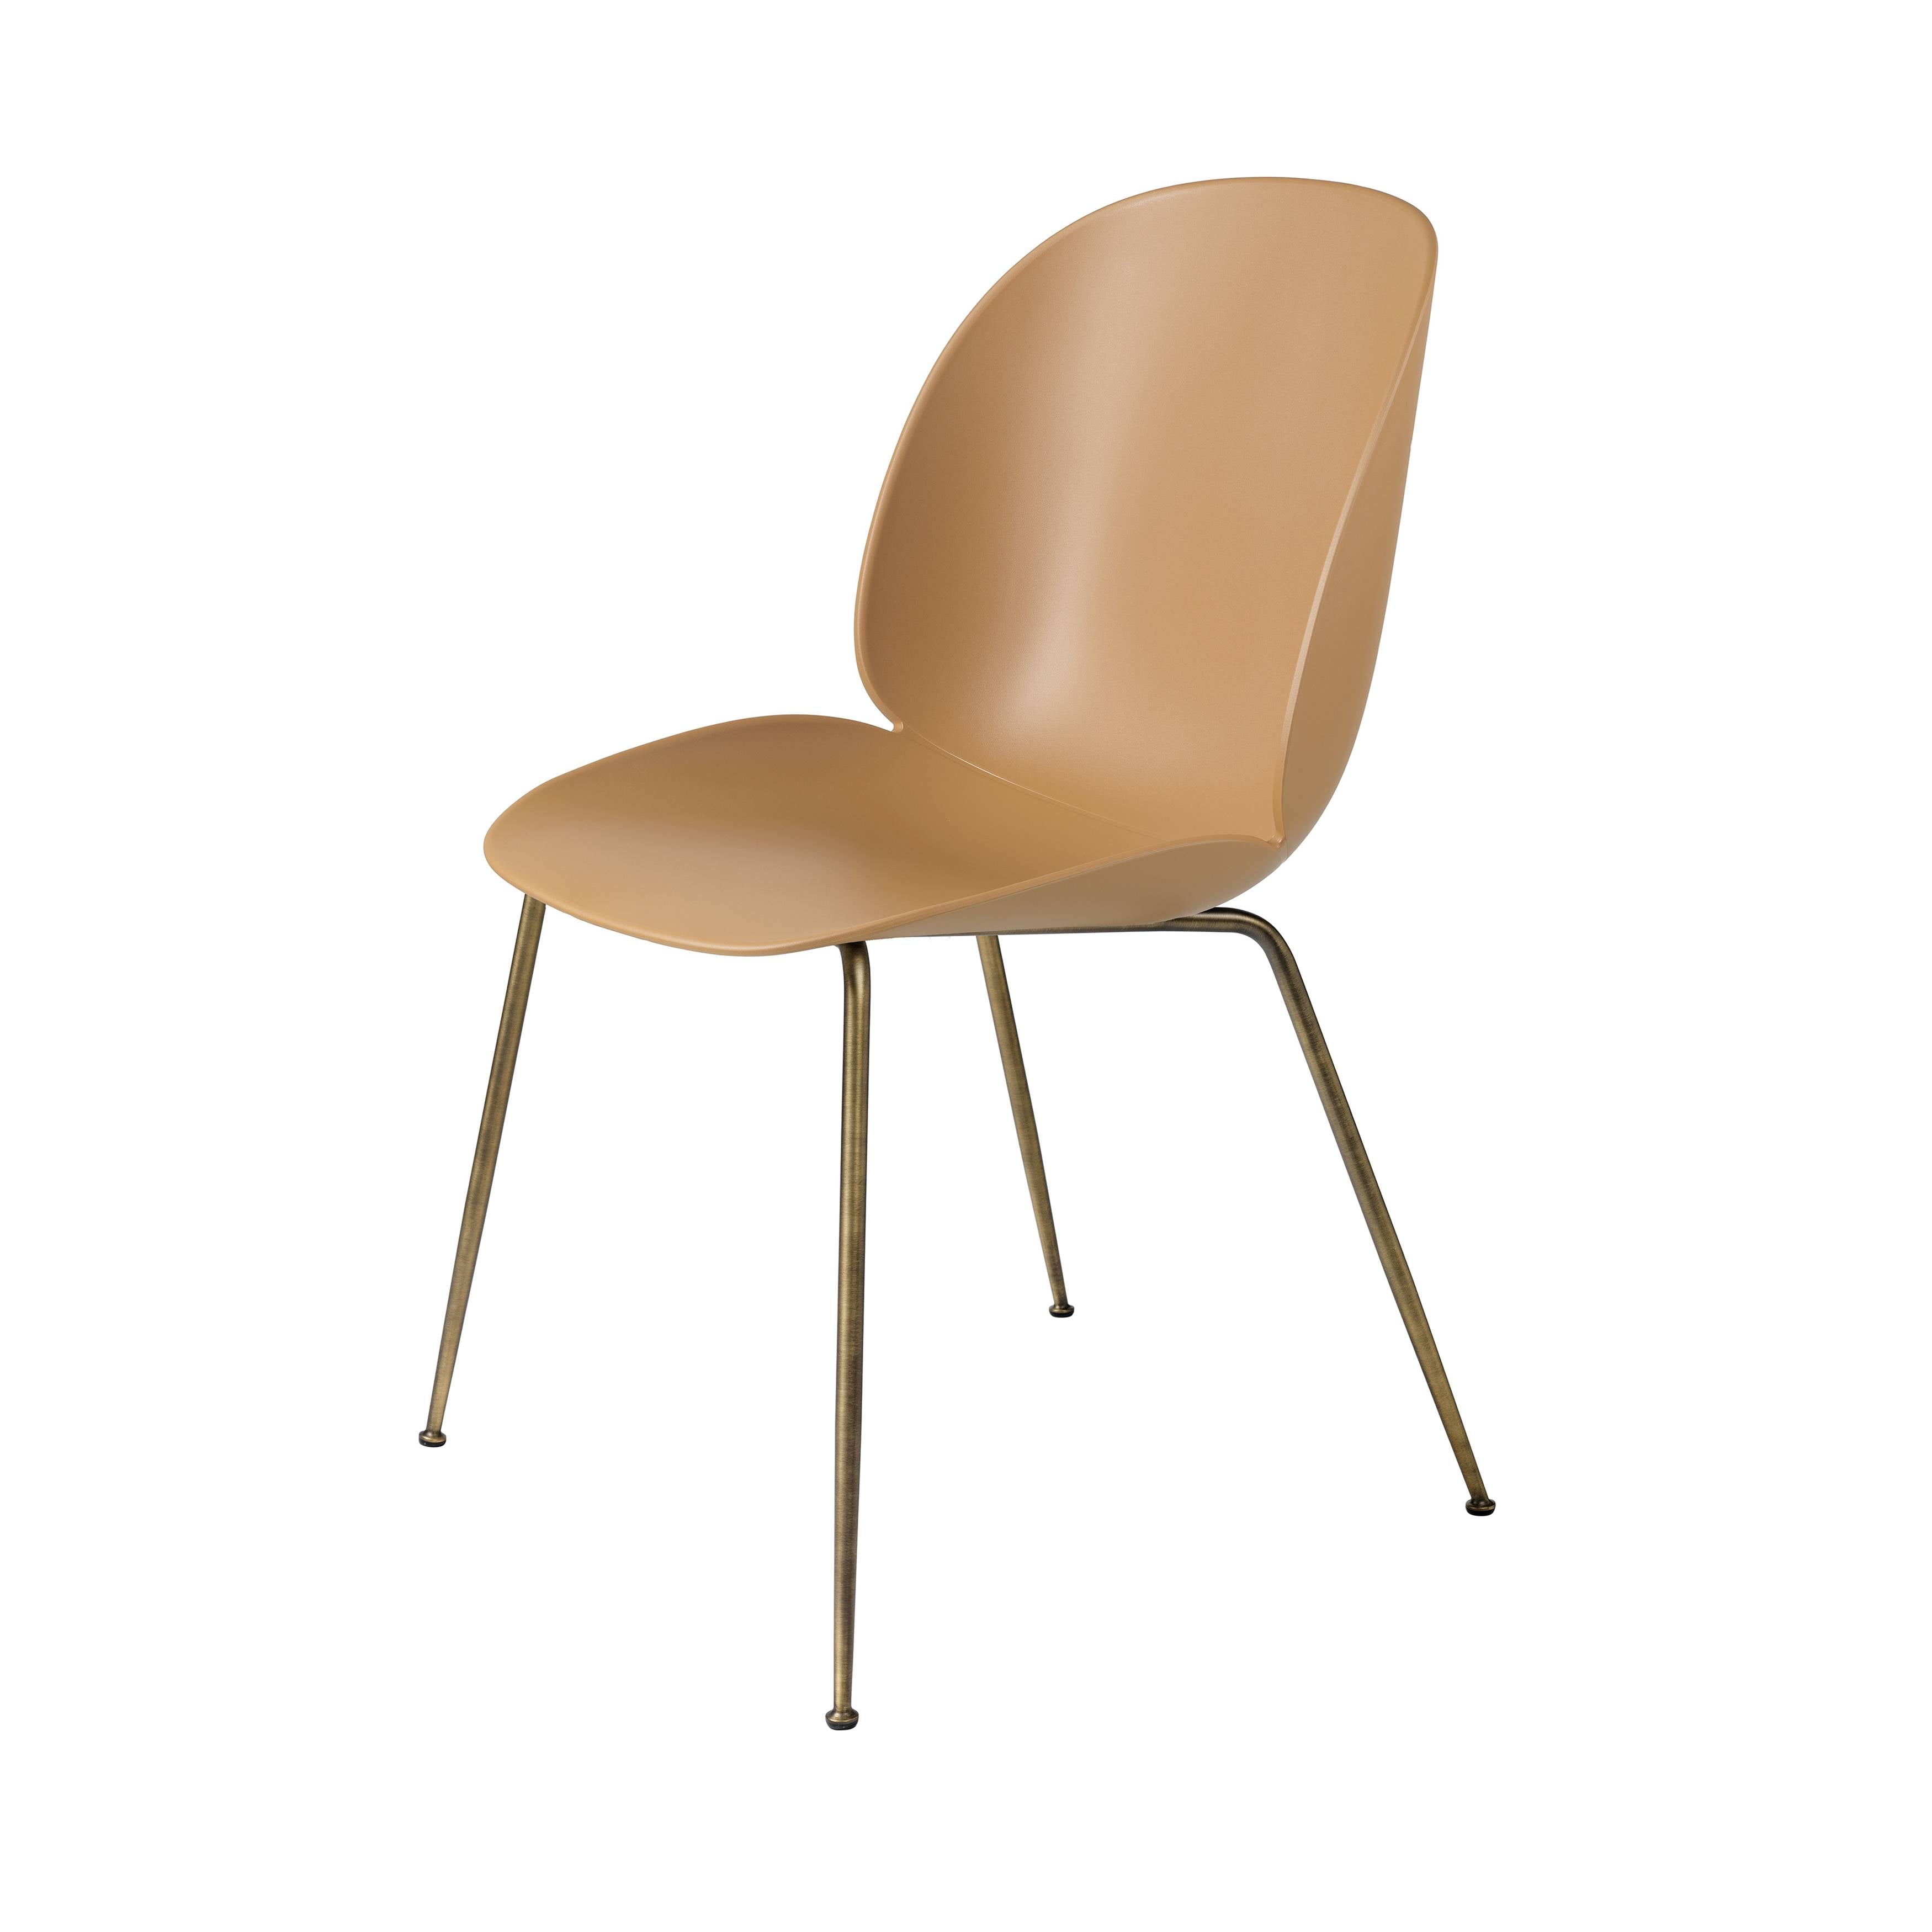 Beetle Dining Chair: Conic Base + Amber Brown + Antique Brass + Felt Glides